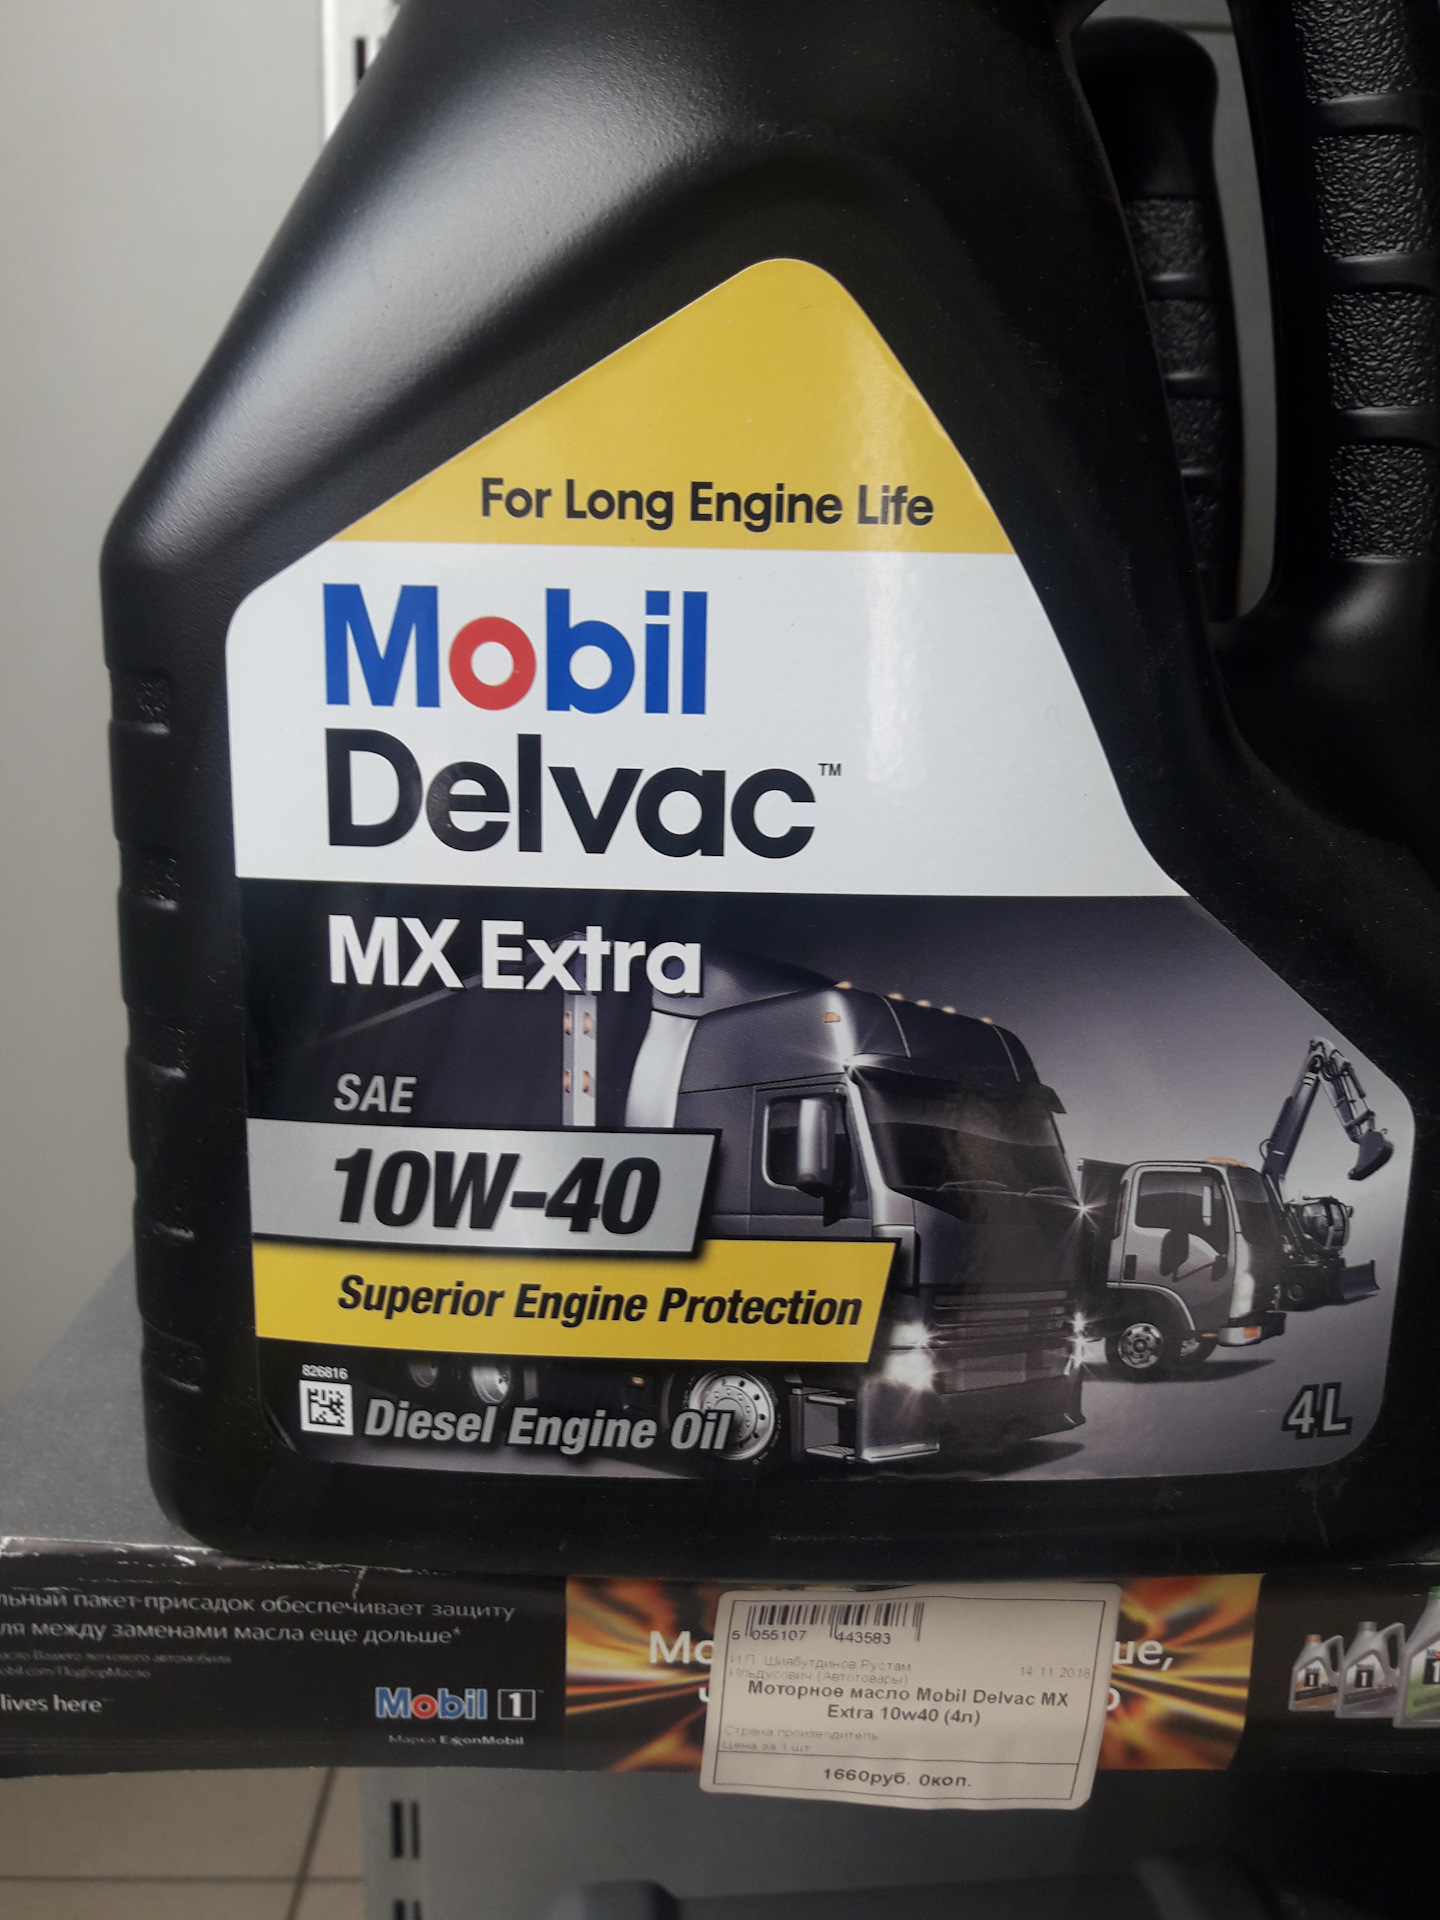 Масло mobil extra. Мобил Делвак МХ Экстра 10w 40. Мобил Делвак 10w 40 MX Extra бочка. Mobil Delvac 10w 40 Diesel MX Extra 1литр. Мобил Делвак 10w 40 характеристики.